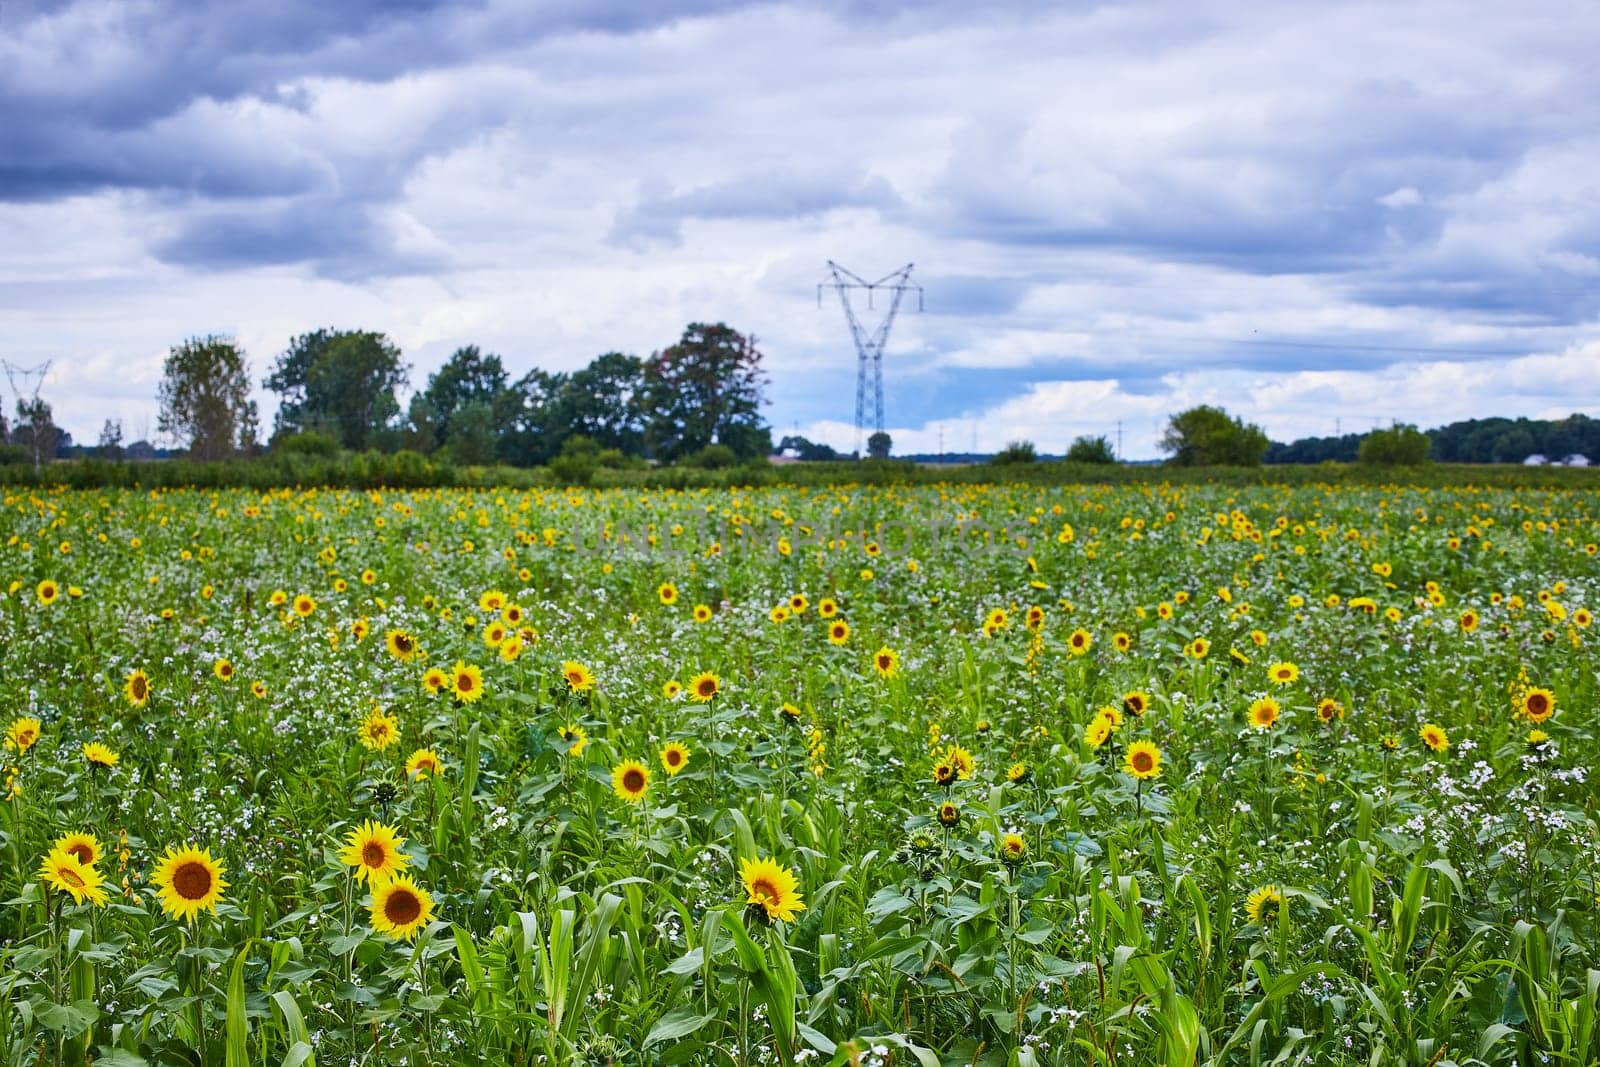 Vibrant sunflower field meets modern infrastructure in tranquil Goshen, Indiana, showcasing nature's beauty and balance with development.